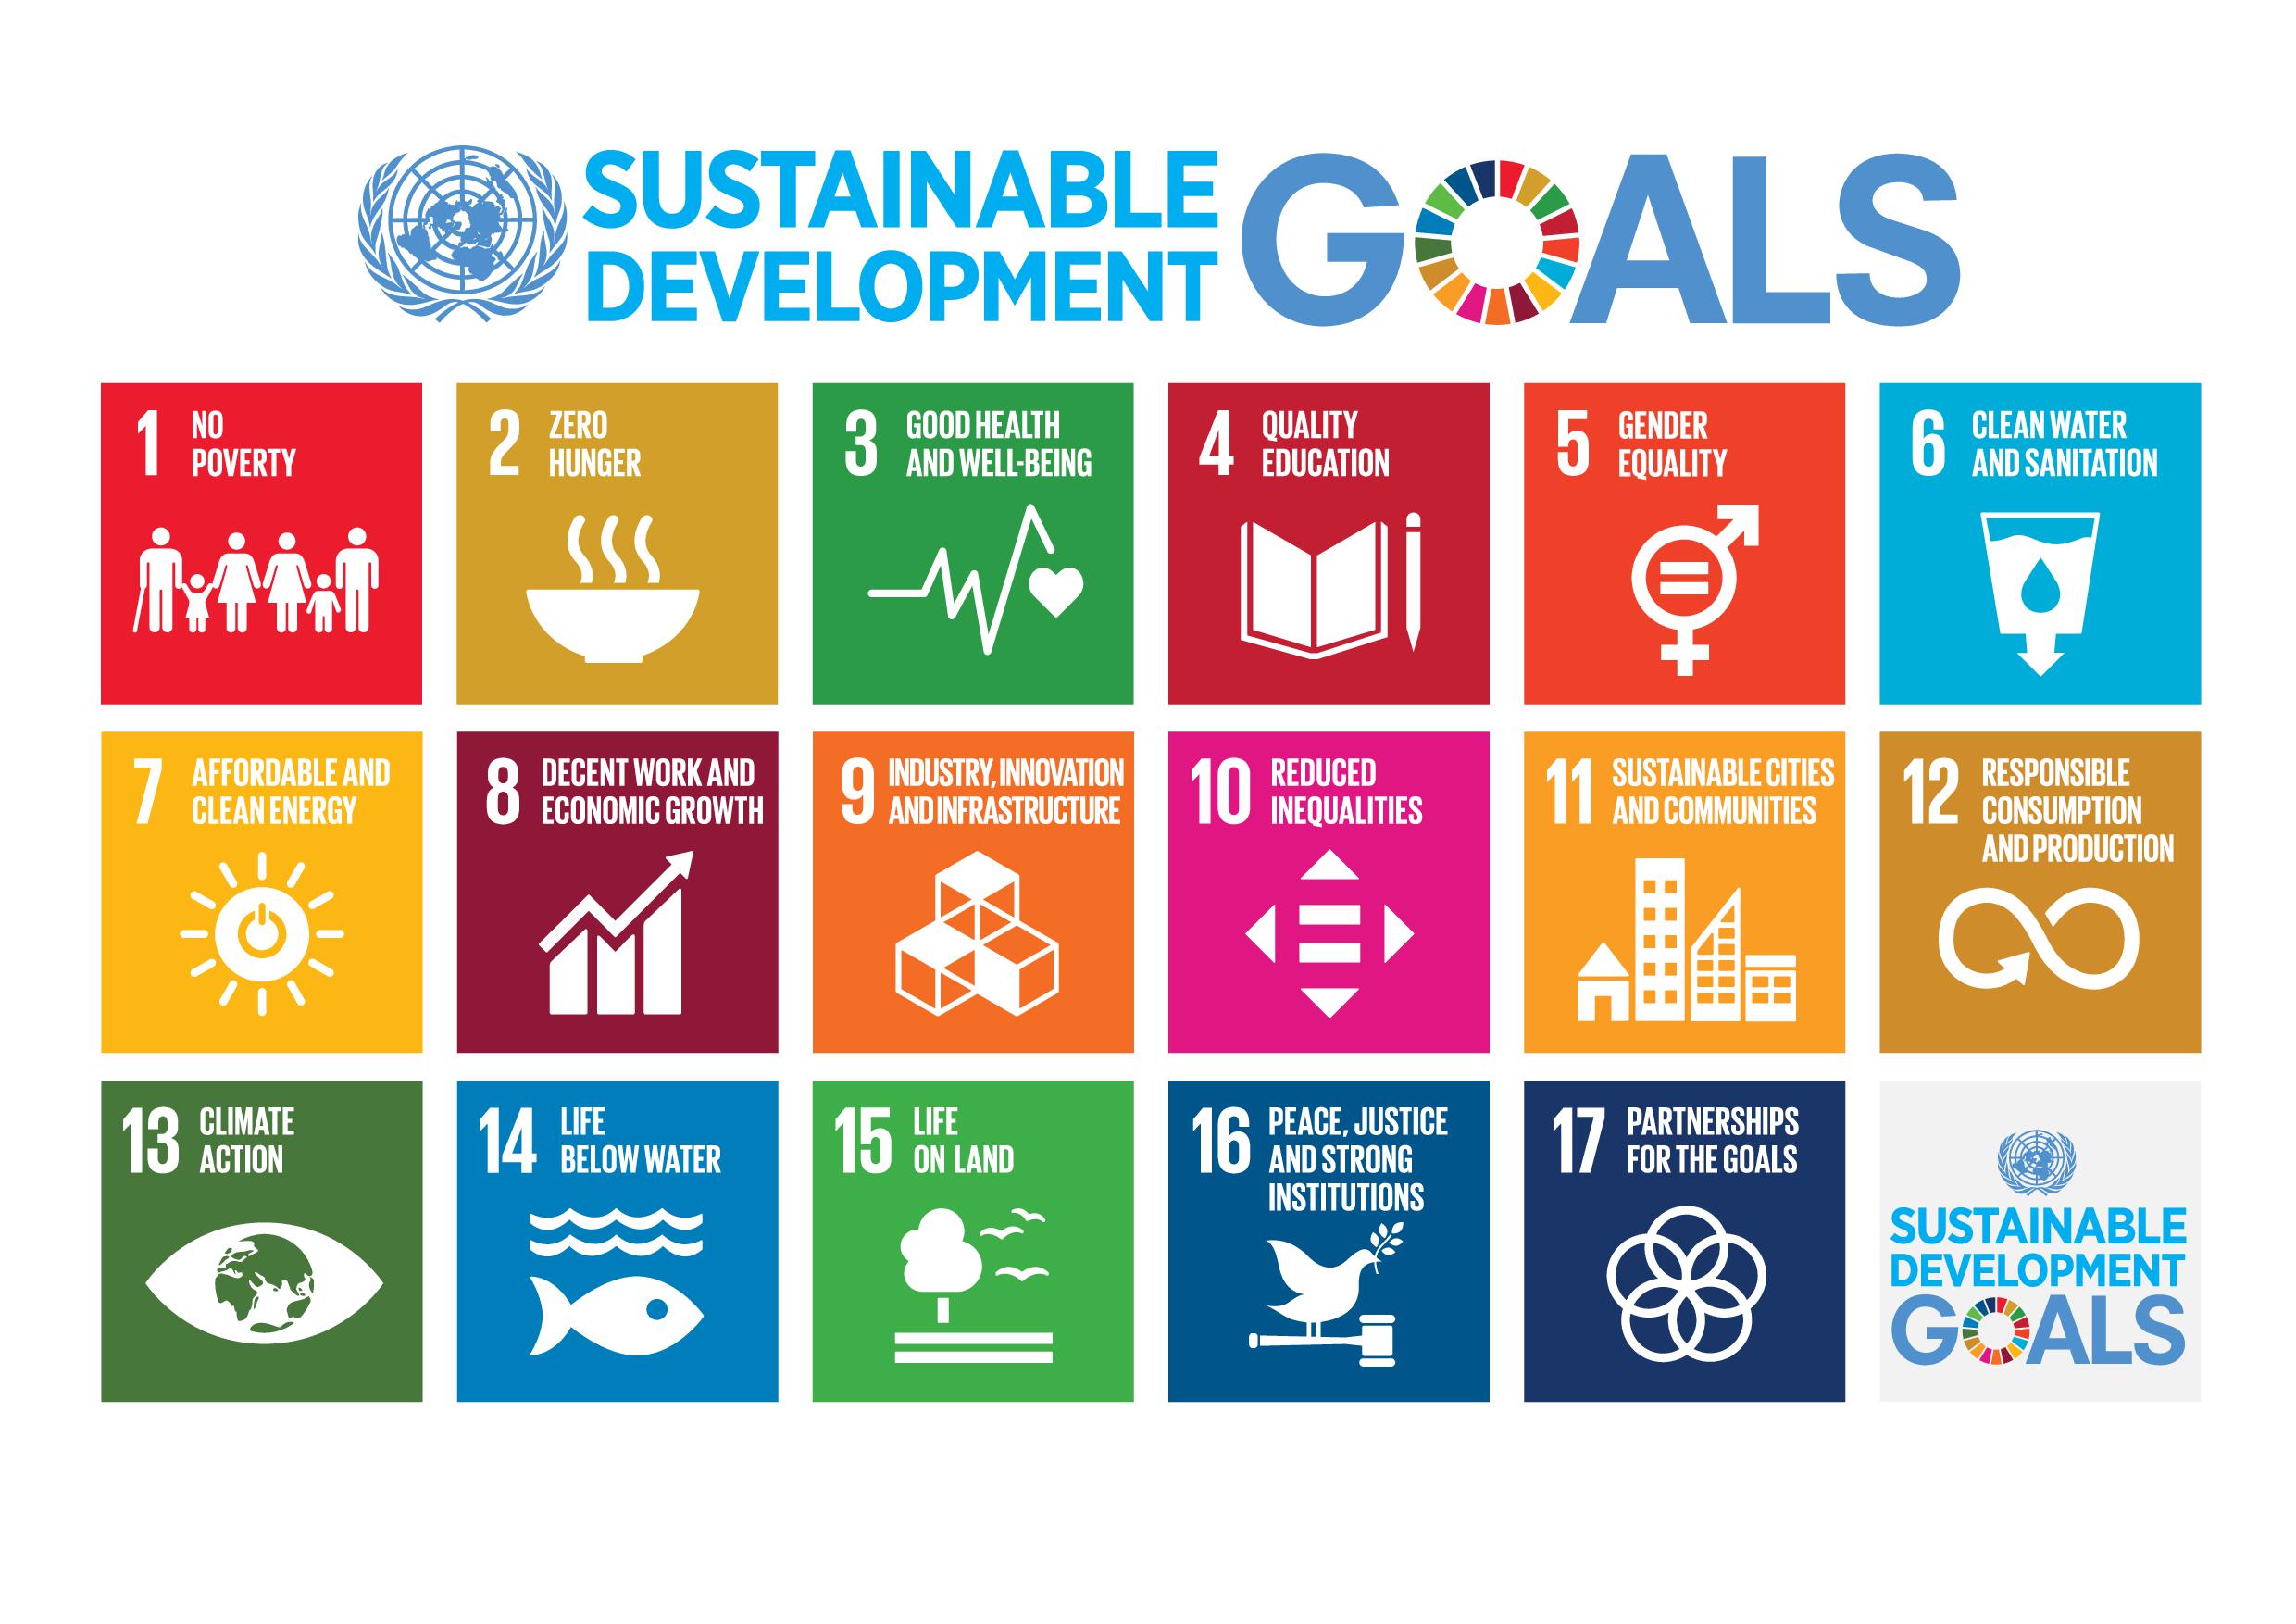 Joint SDG Fund Doubles Its Portfolio to $114 Million In Catalytic Impact Investments 